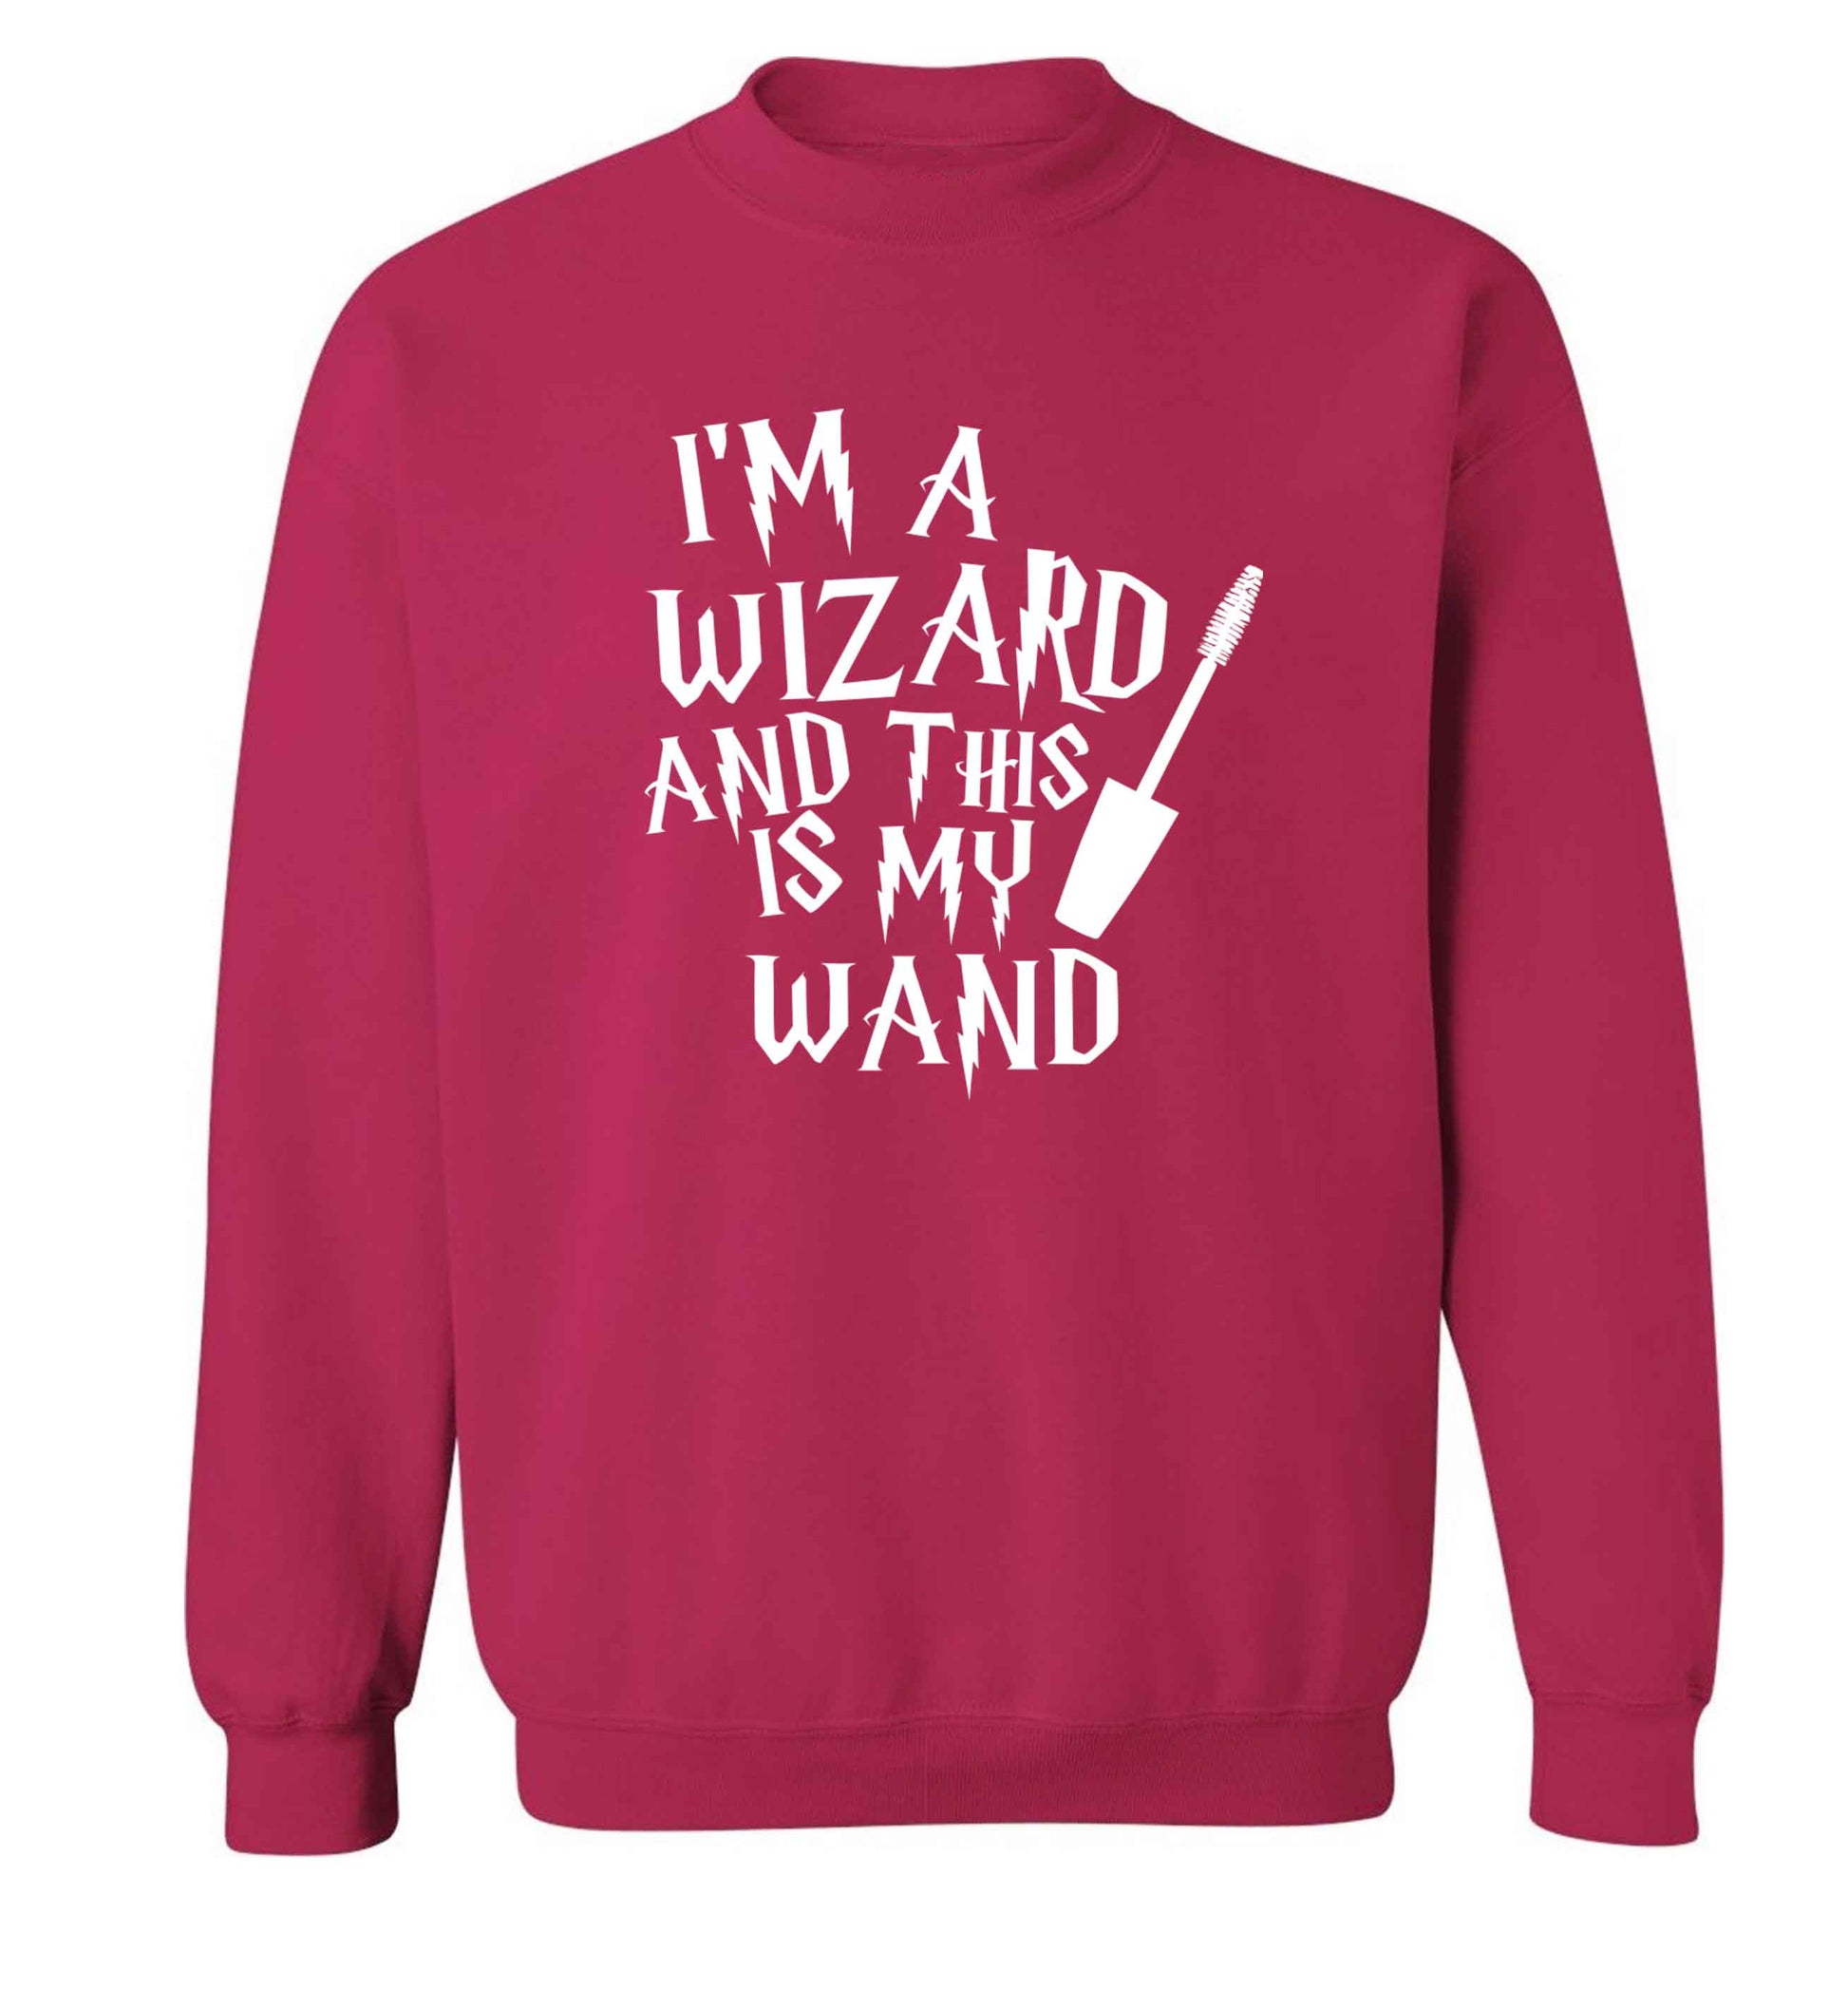 I'm a wizard and this is my wand Adult's unisex pink Sweater 2XL